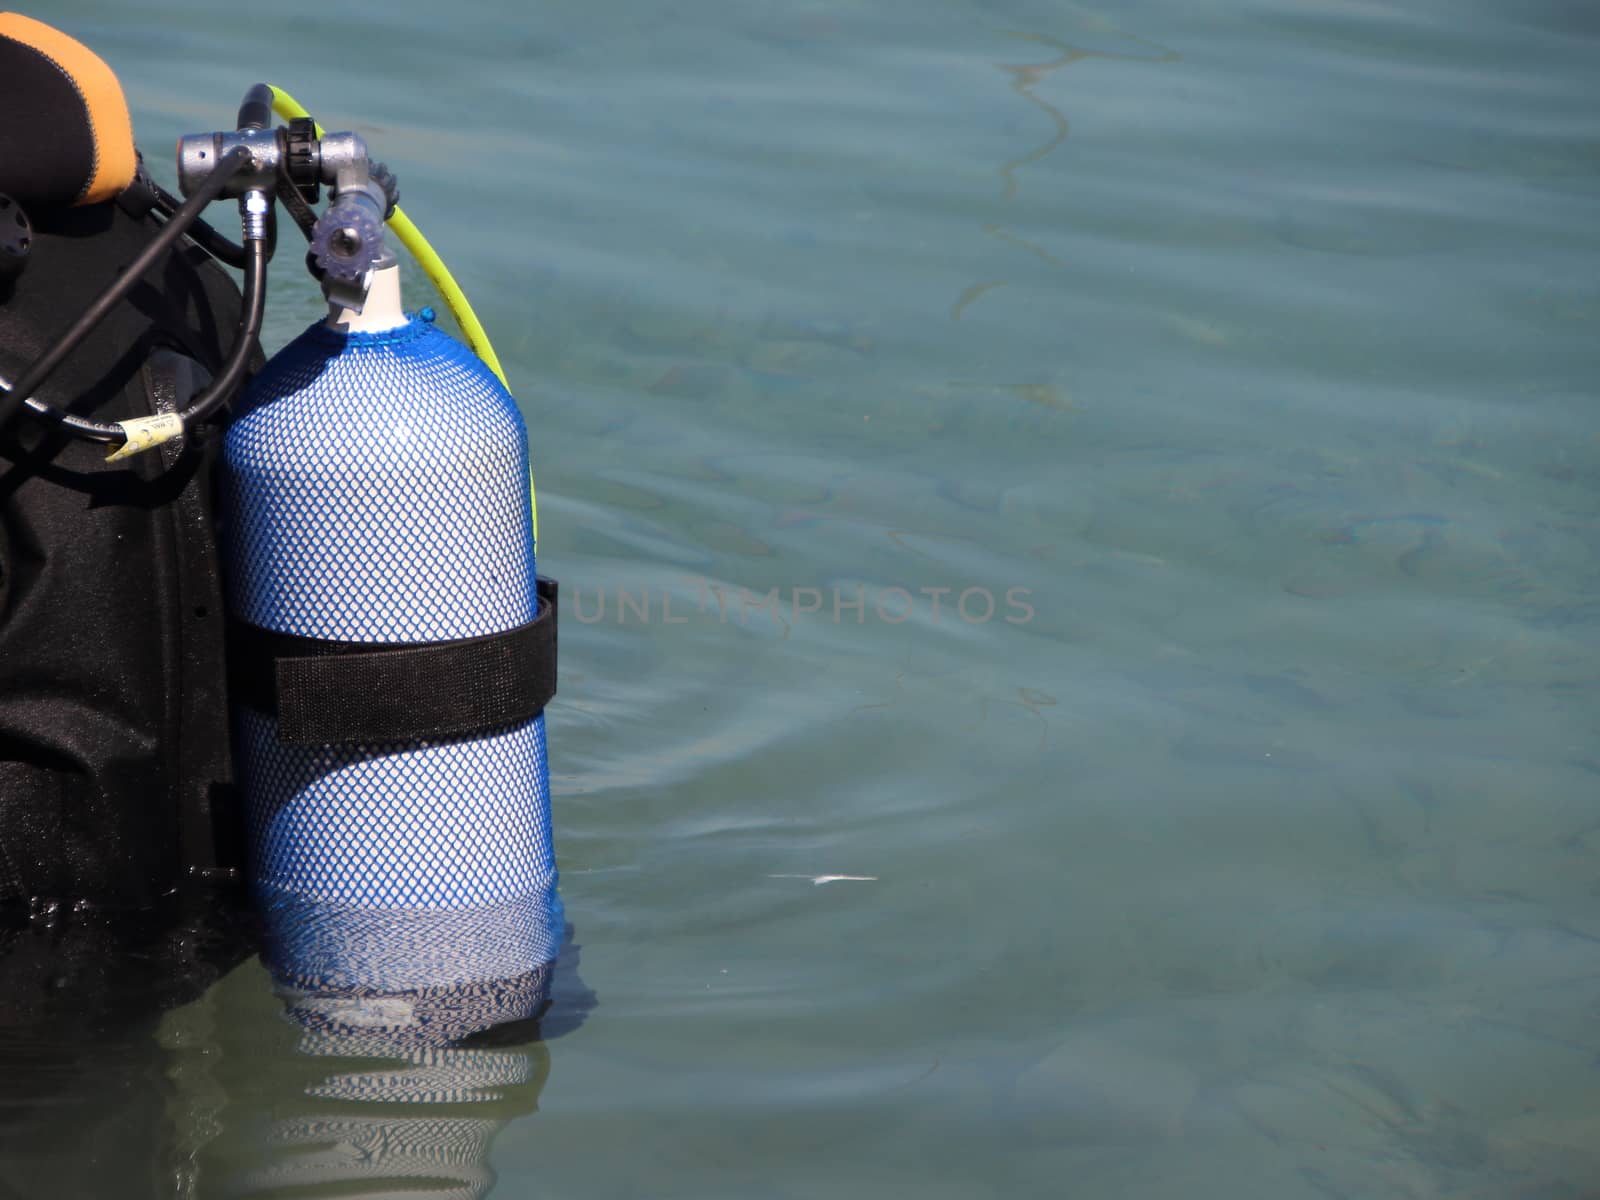 Scuba diving equipment on backside of Diver in Water by HoleInTheBox